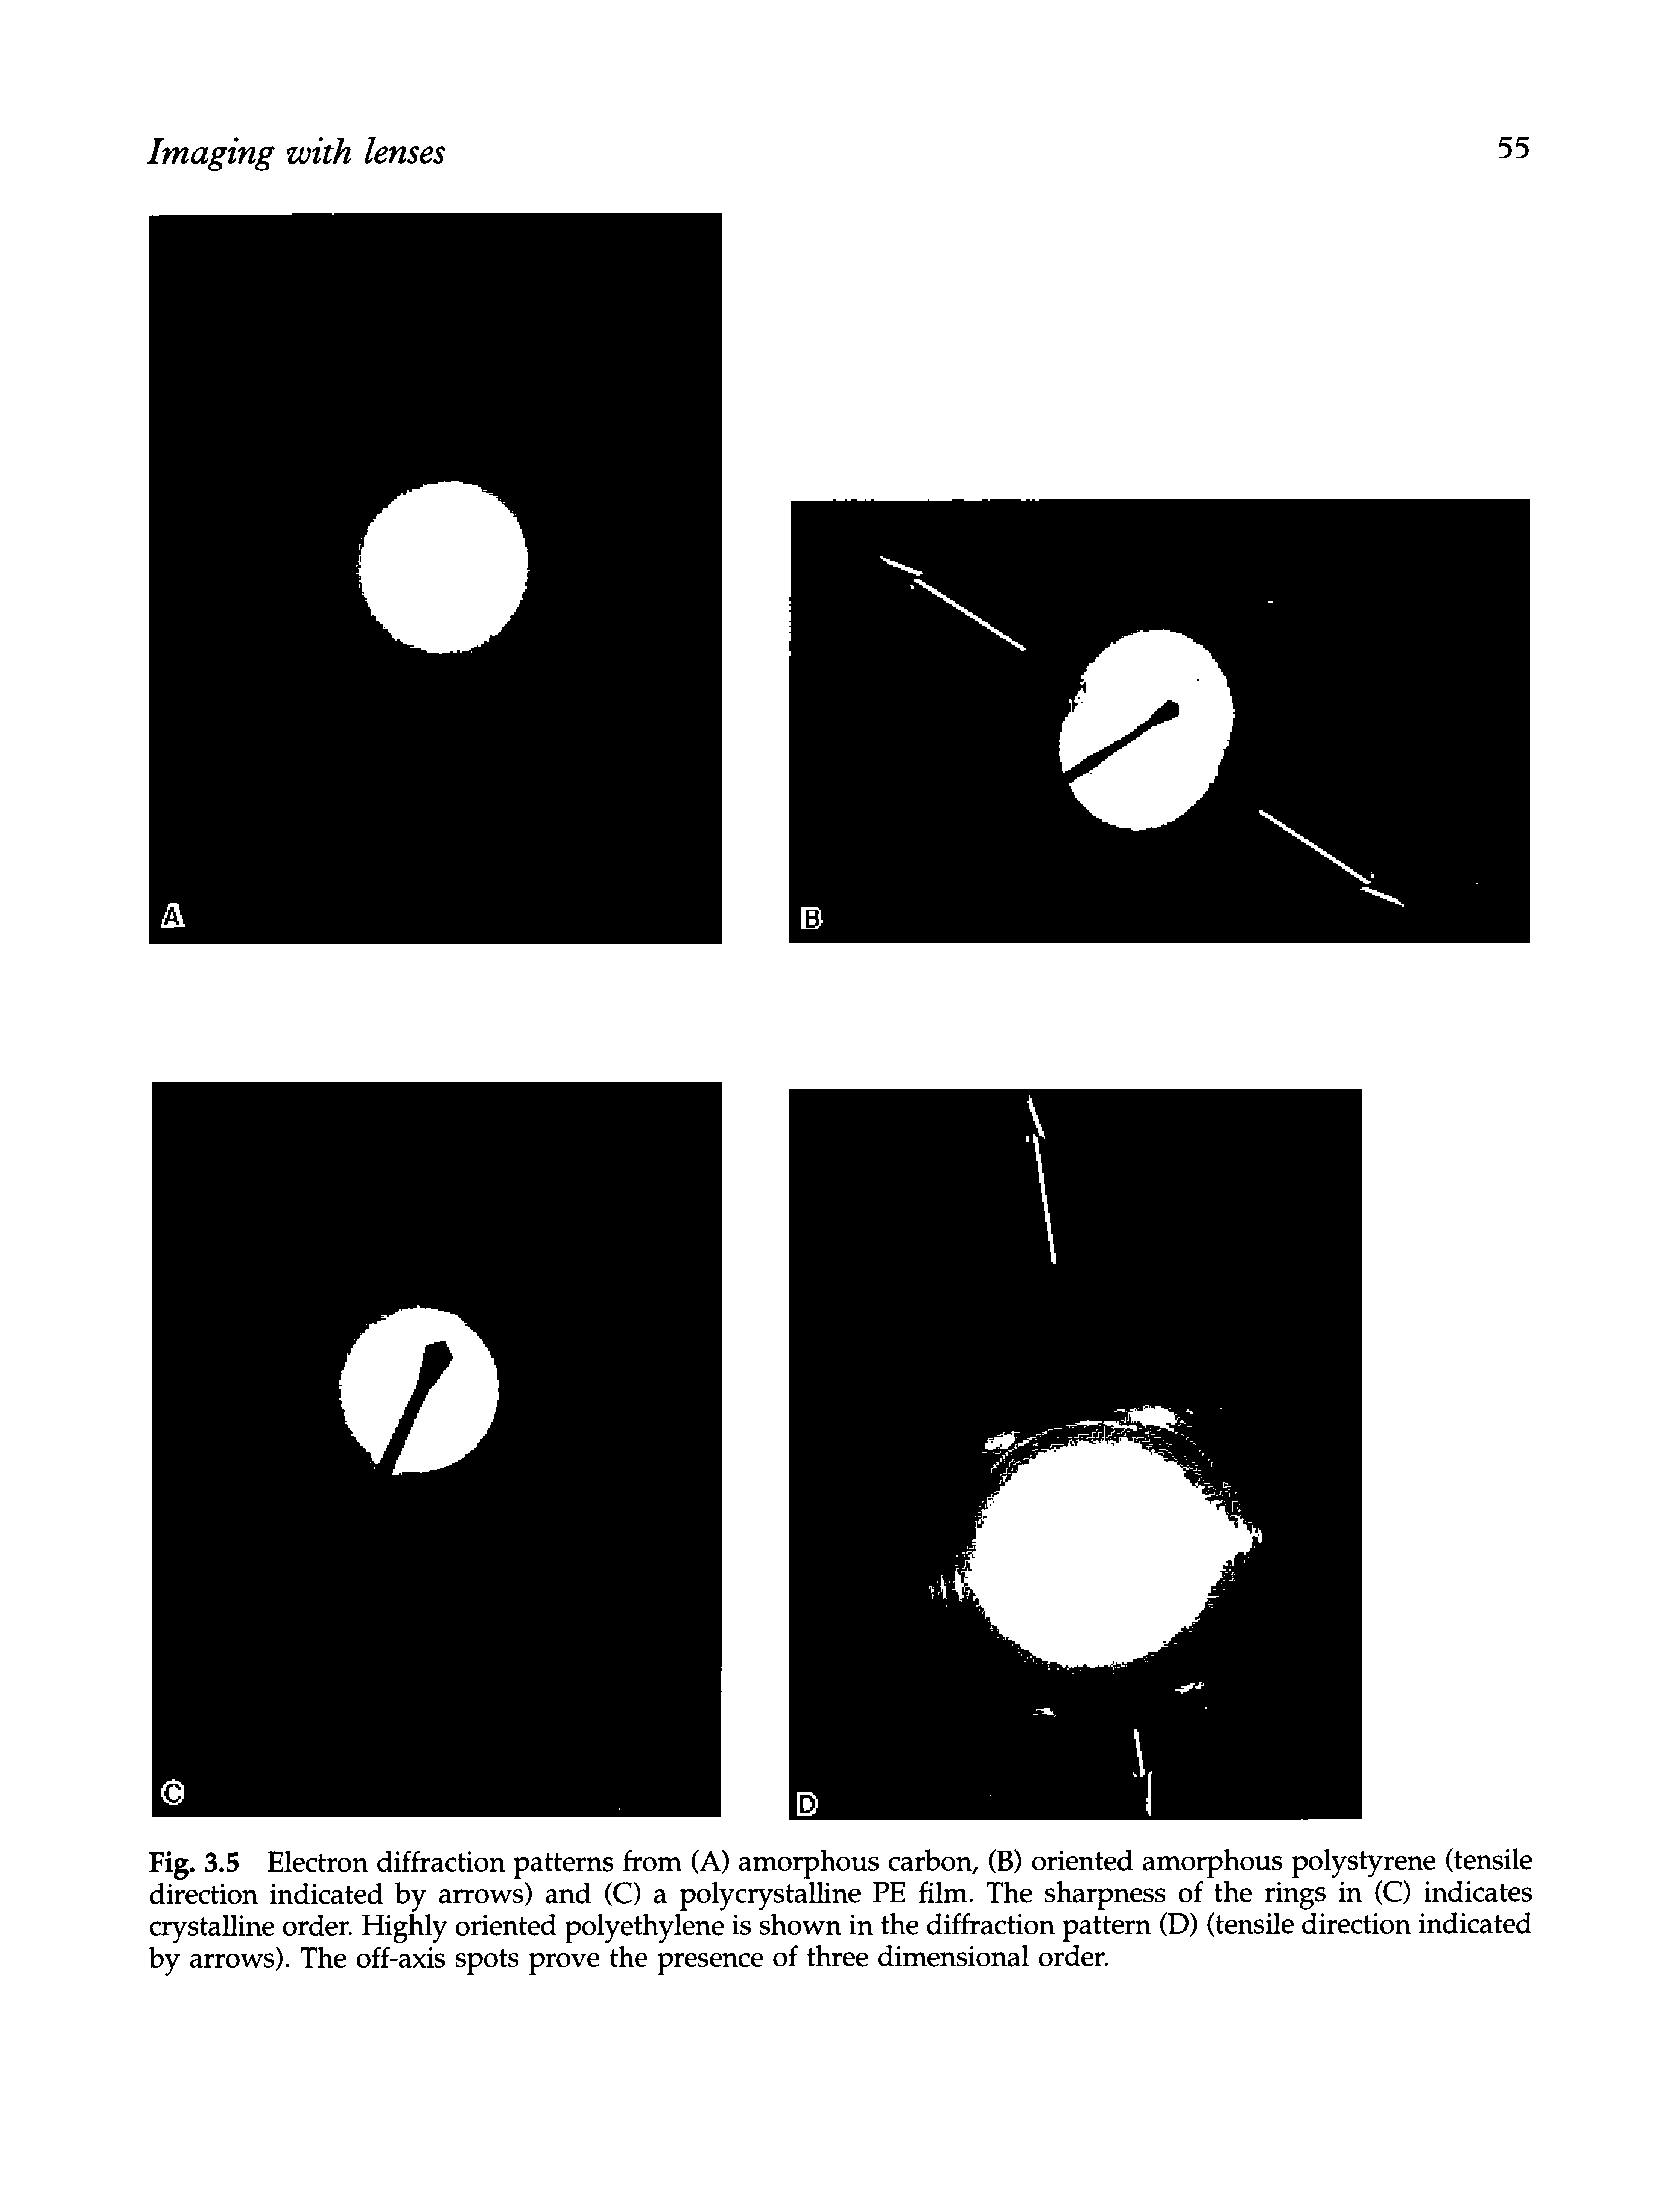 Fig. 3.5 Electron diffraction patterns from (A) amorphous carbon, (B) oriented amorphous polystyrene (tensile direction indicated by arrows) and (C) a polycrystalline PE film. The sharpness of the rings in (C) indicates crystalline order. Highly oriented polyethylene is shown in the diffraction pattern (D) (tensile direction indicated by arrows). The off-axis spots prove the presence of three dimensional order.